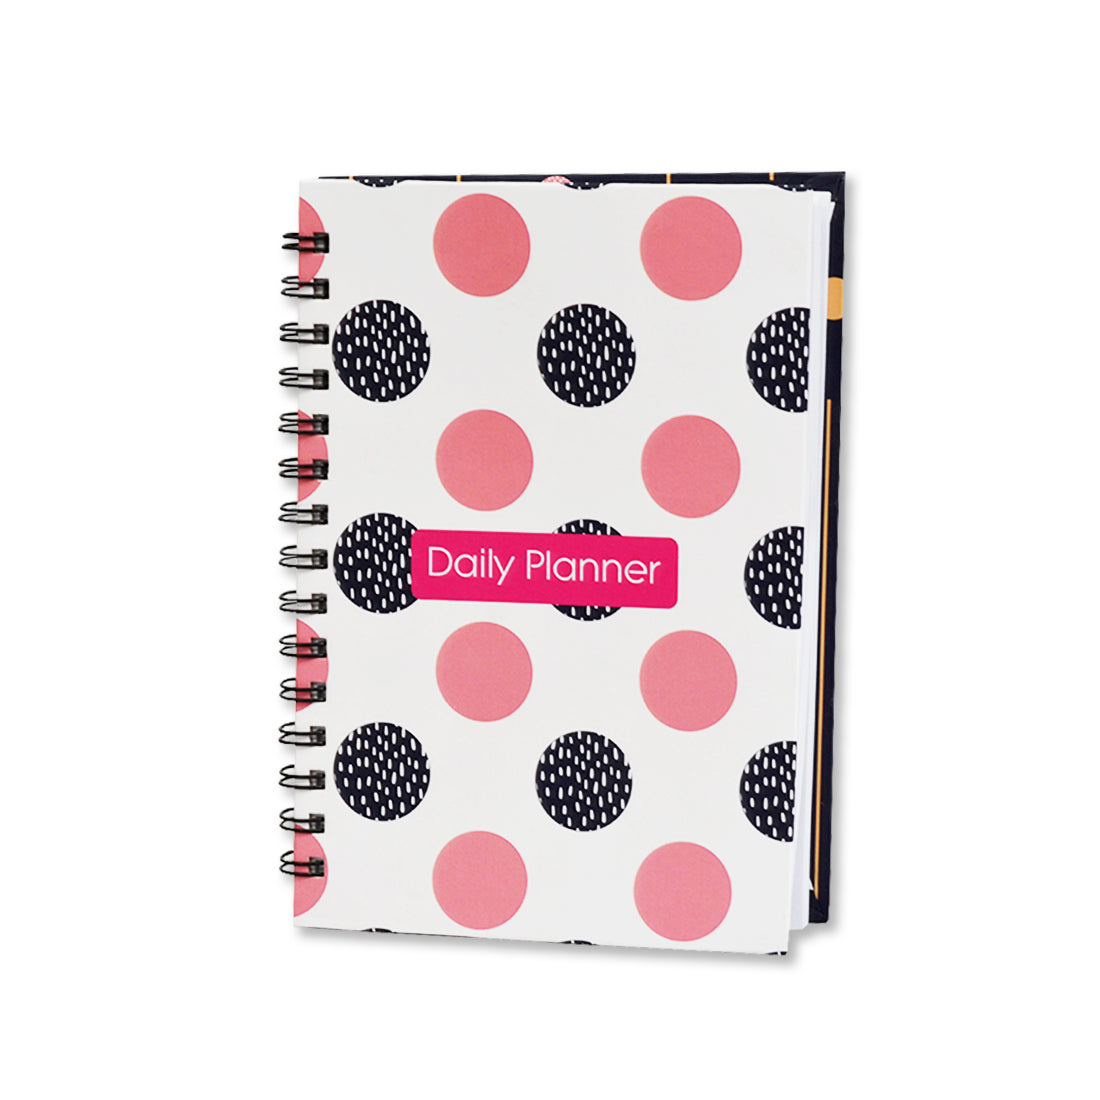 Daily Tracker Notebook Undated Planner, Hard Bound Cover with Twin - Wire Sprial Binding, Goal, Meal Planner